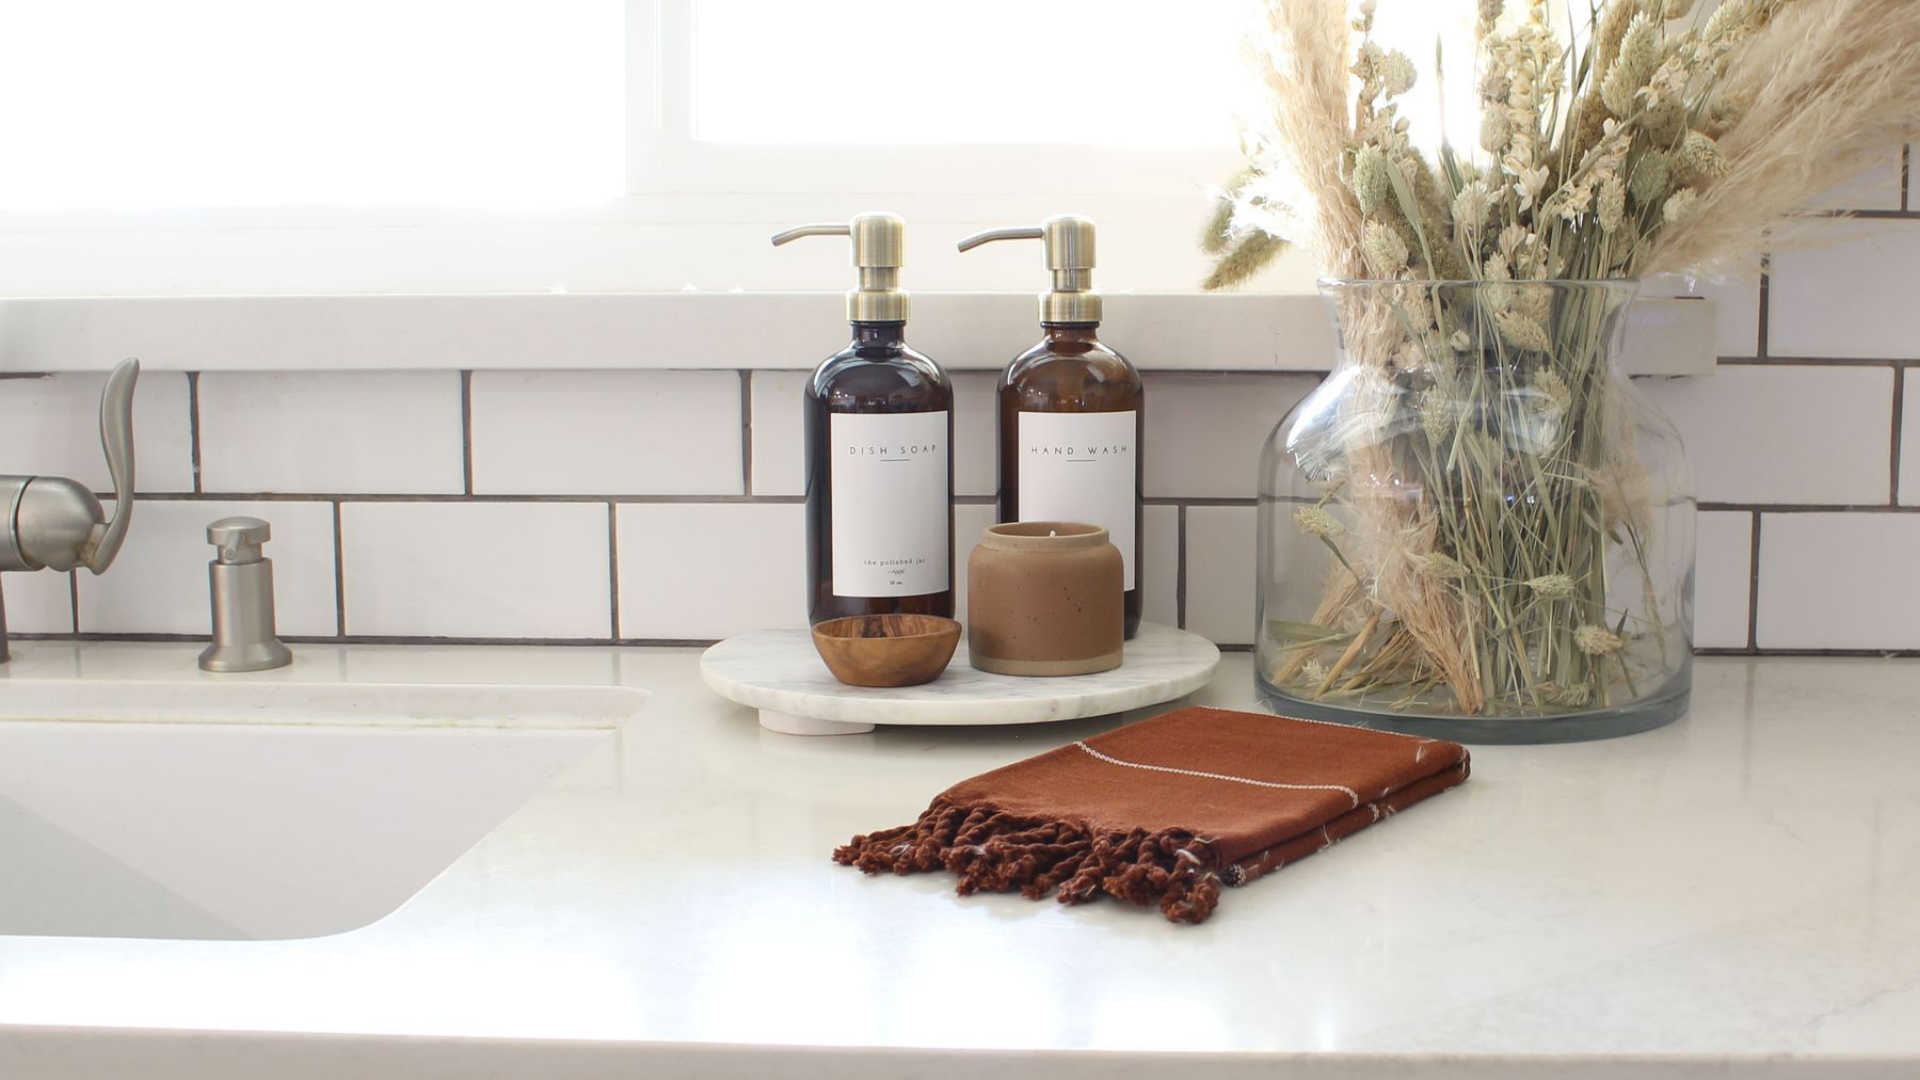 The Polished Jar Amber Glass Bottle Soap Dispensers on Kitchen Counter